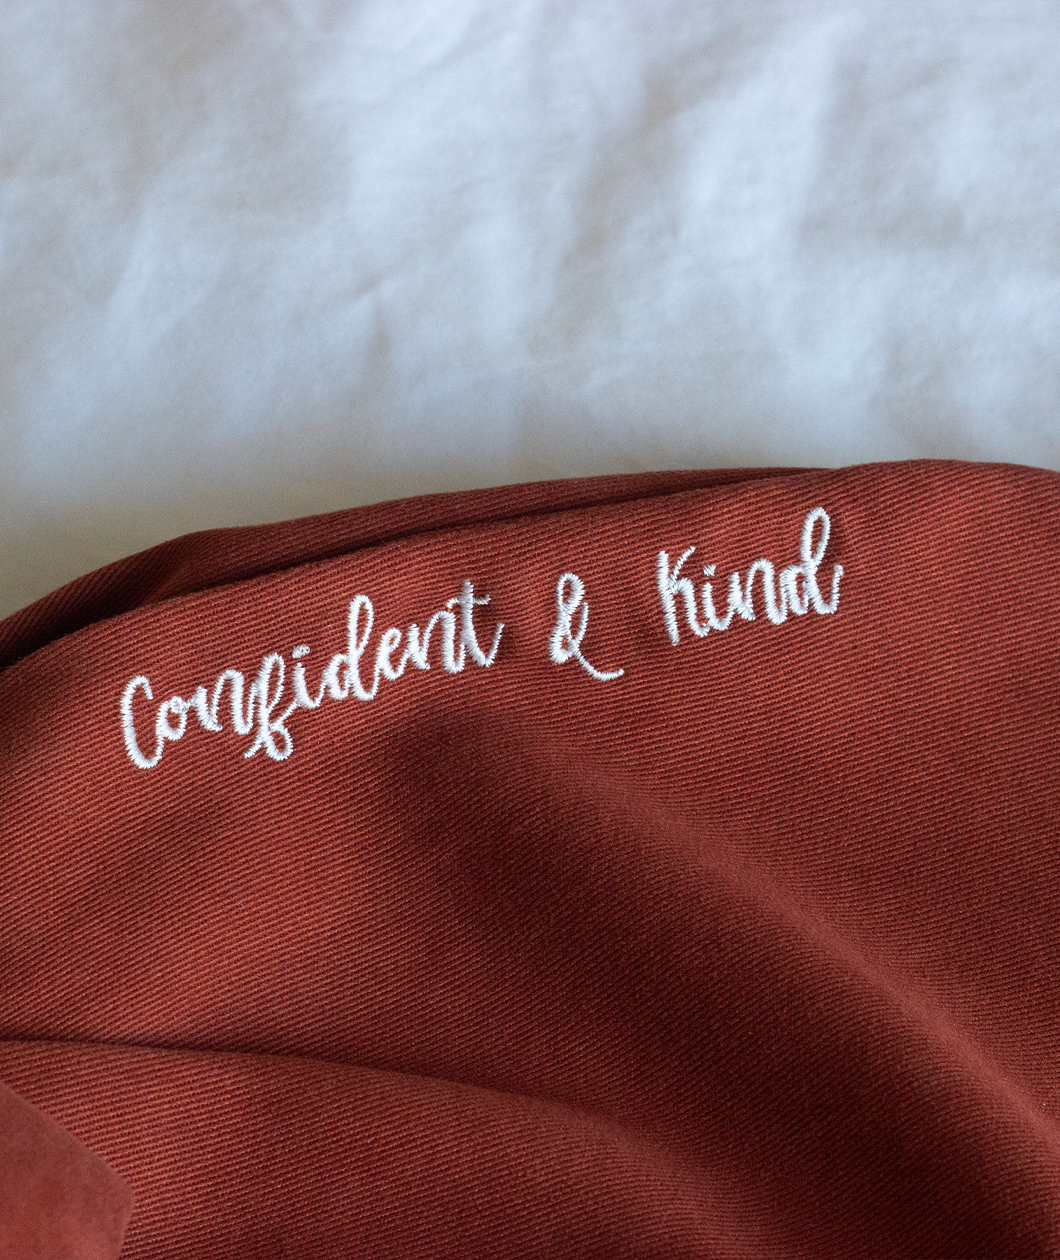 Confident & Kind” is in white curisve font along the lefthand pocket of copper colored pants - from Sierra Schultzzie